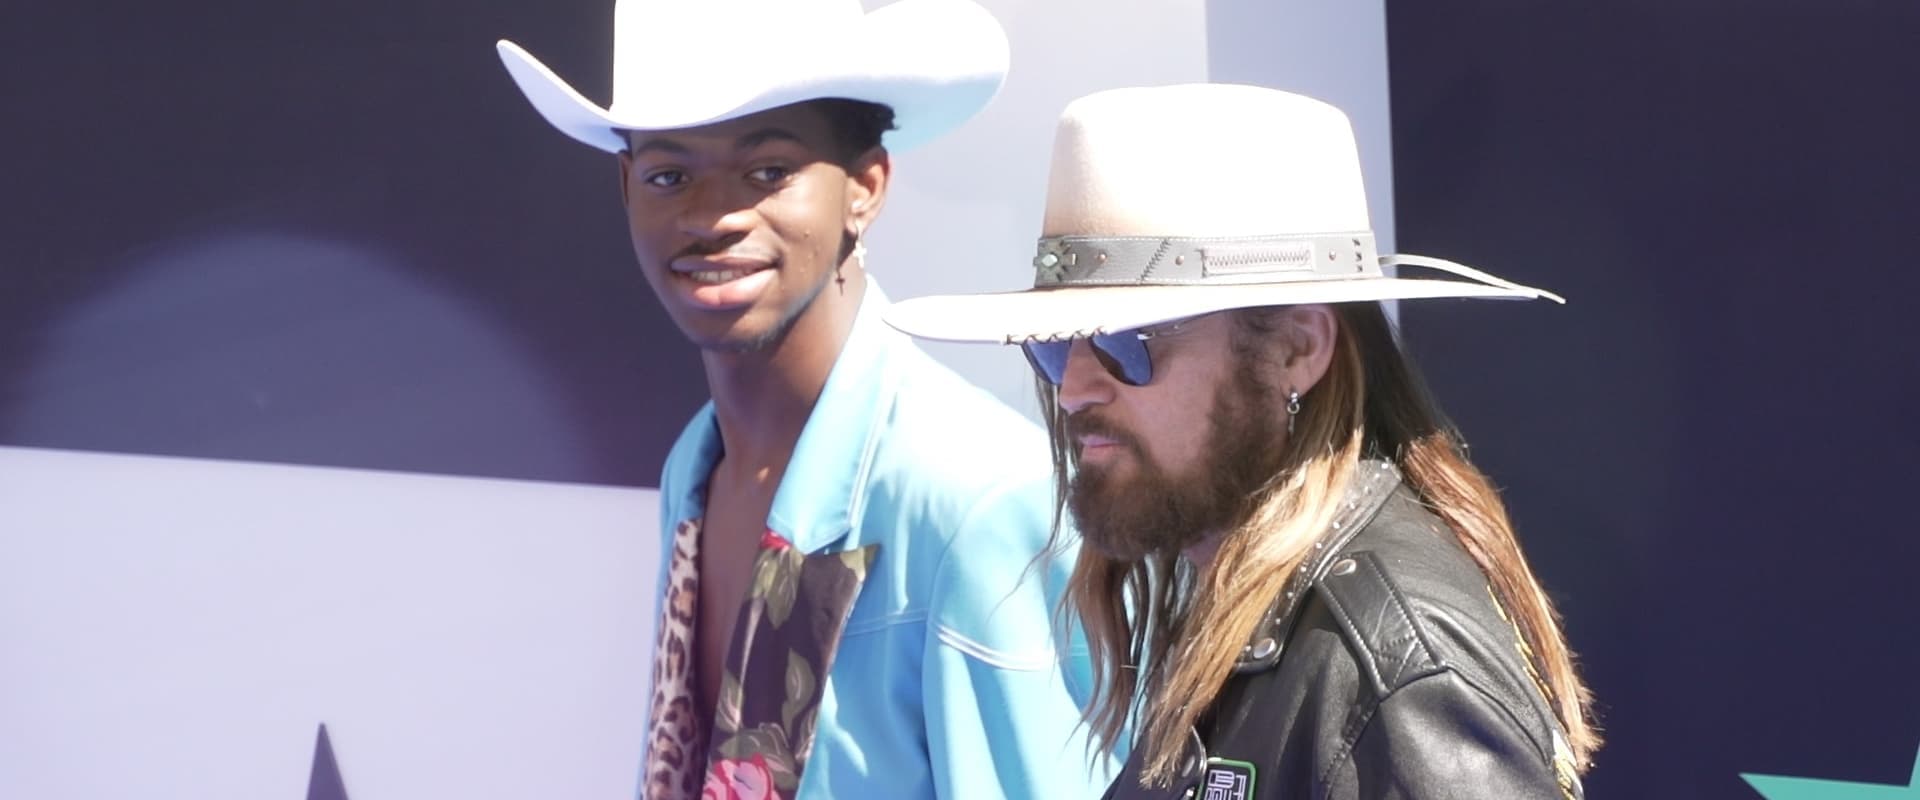 Lil Nas X: Unlikely Cowboy